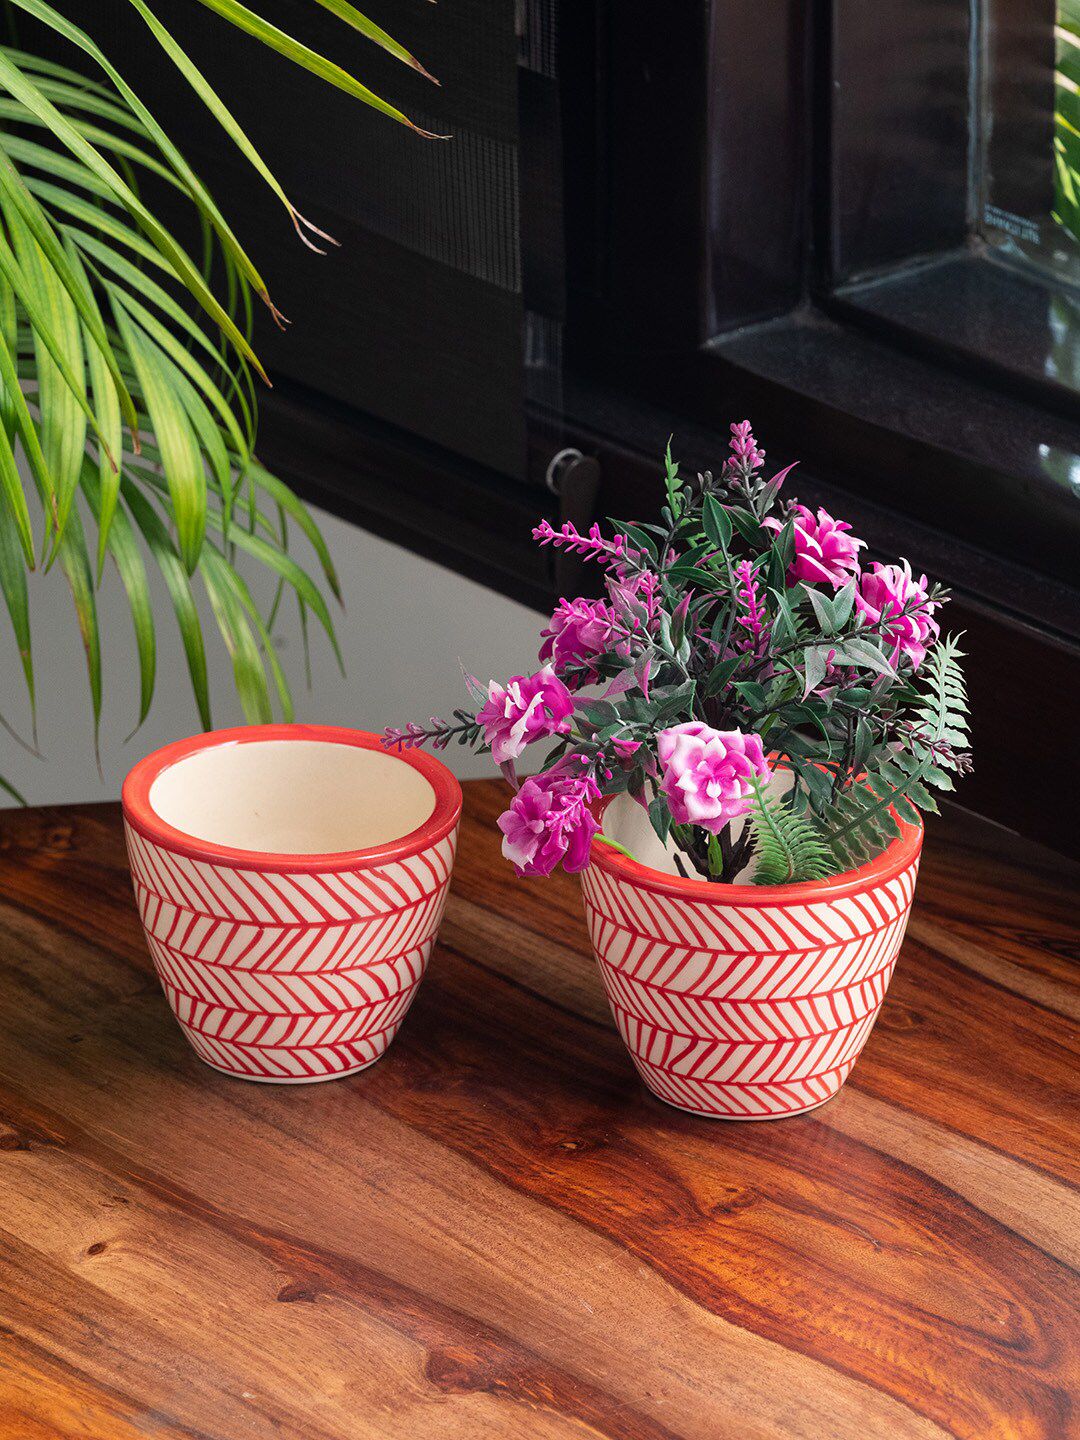 ExclusiveLane Set Of 2 Red & White Hand-Painted Ceramic Table Planters Price in India